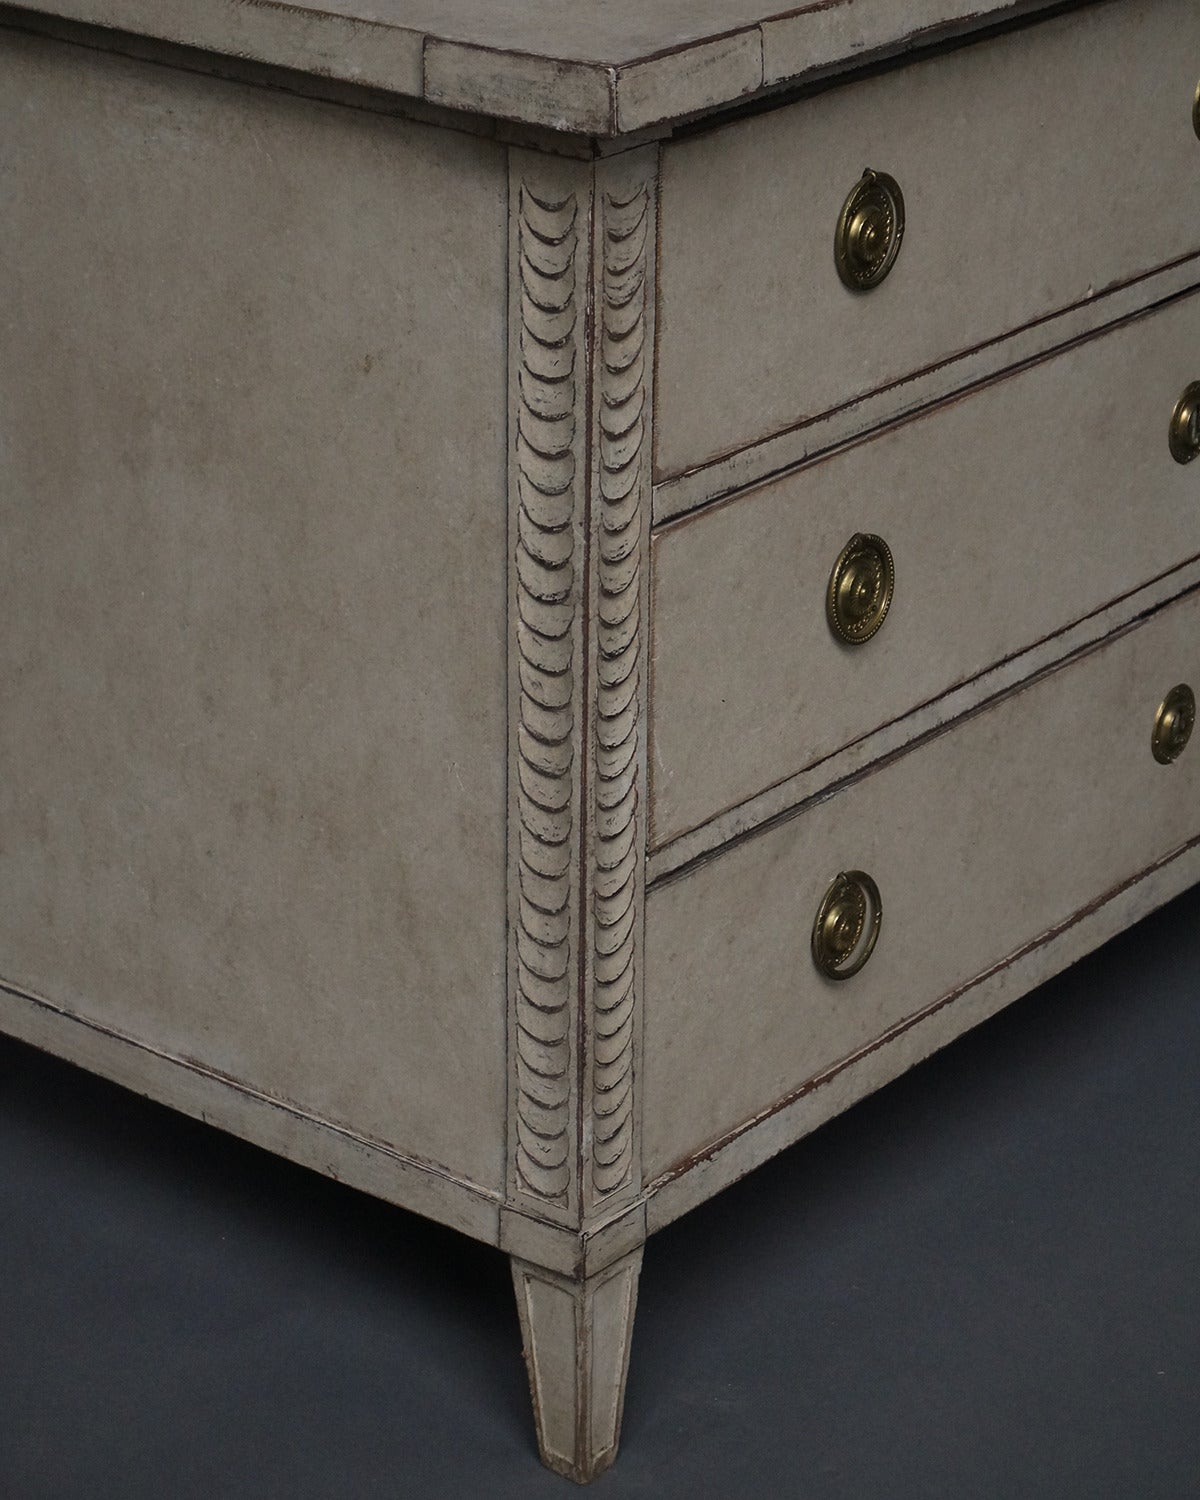 Late Gustavian chest of drawers, Sweden, circa 1830, with fish scale carving at the corners. Shaped top and brass hardware.